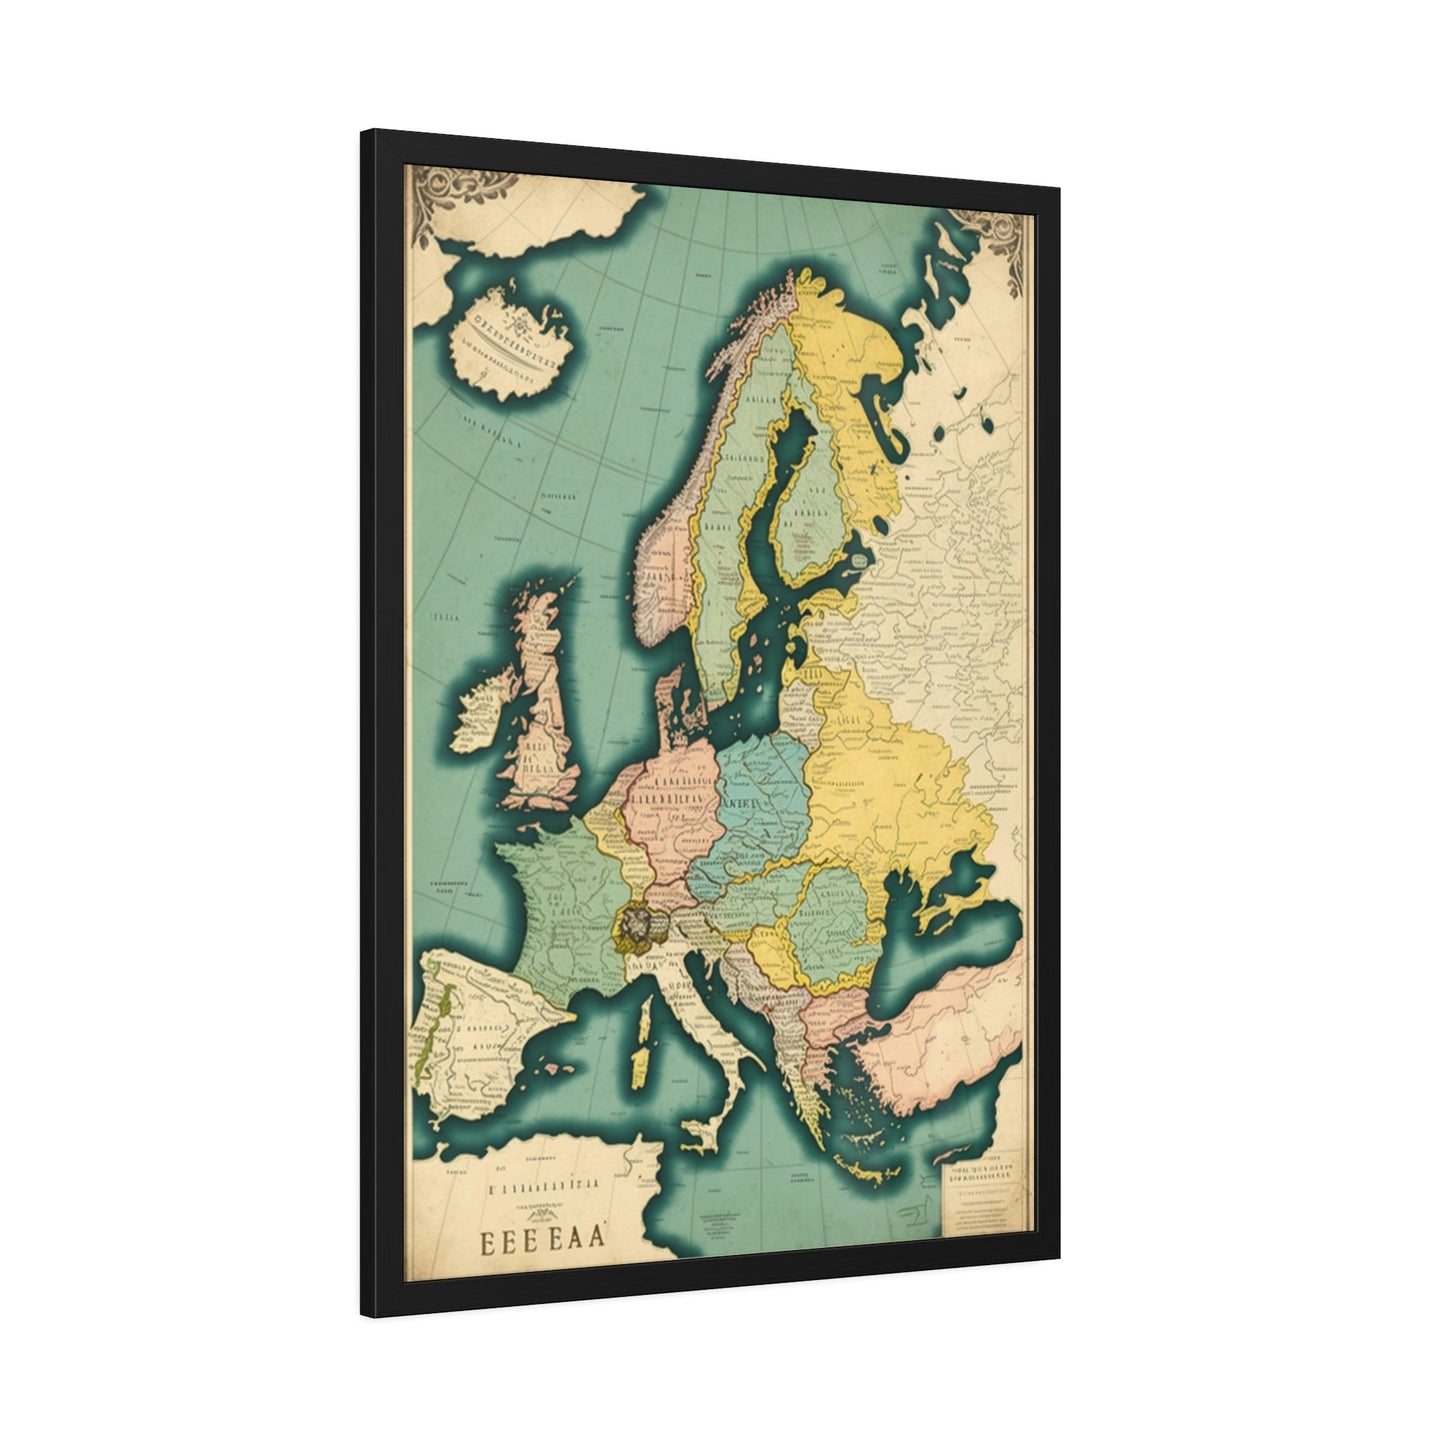 Vintage Visions: A Painting of Vintage Maps as a Window to the Past